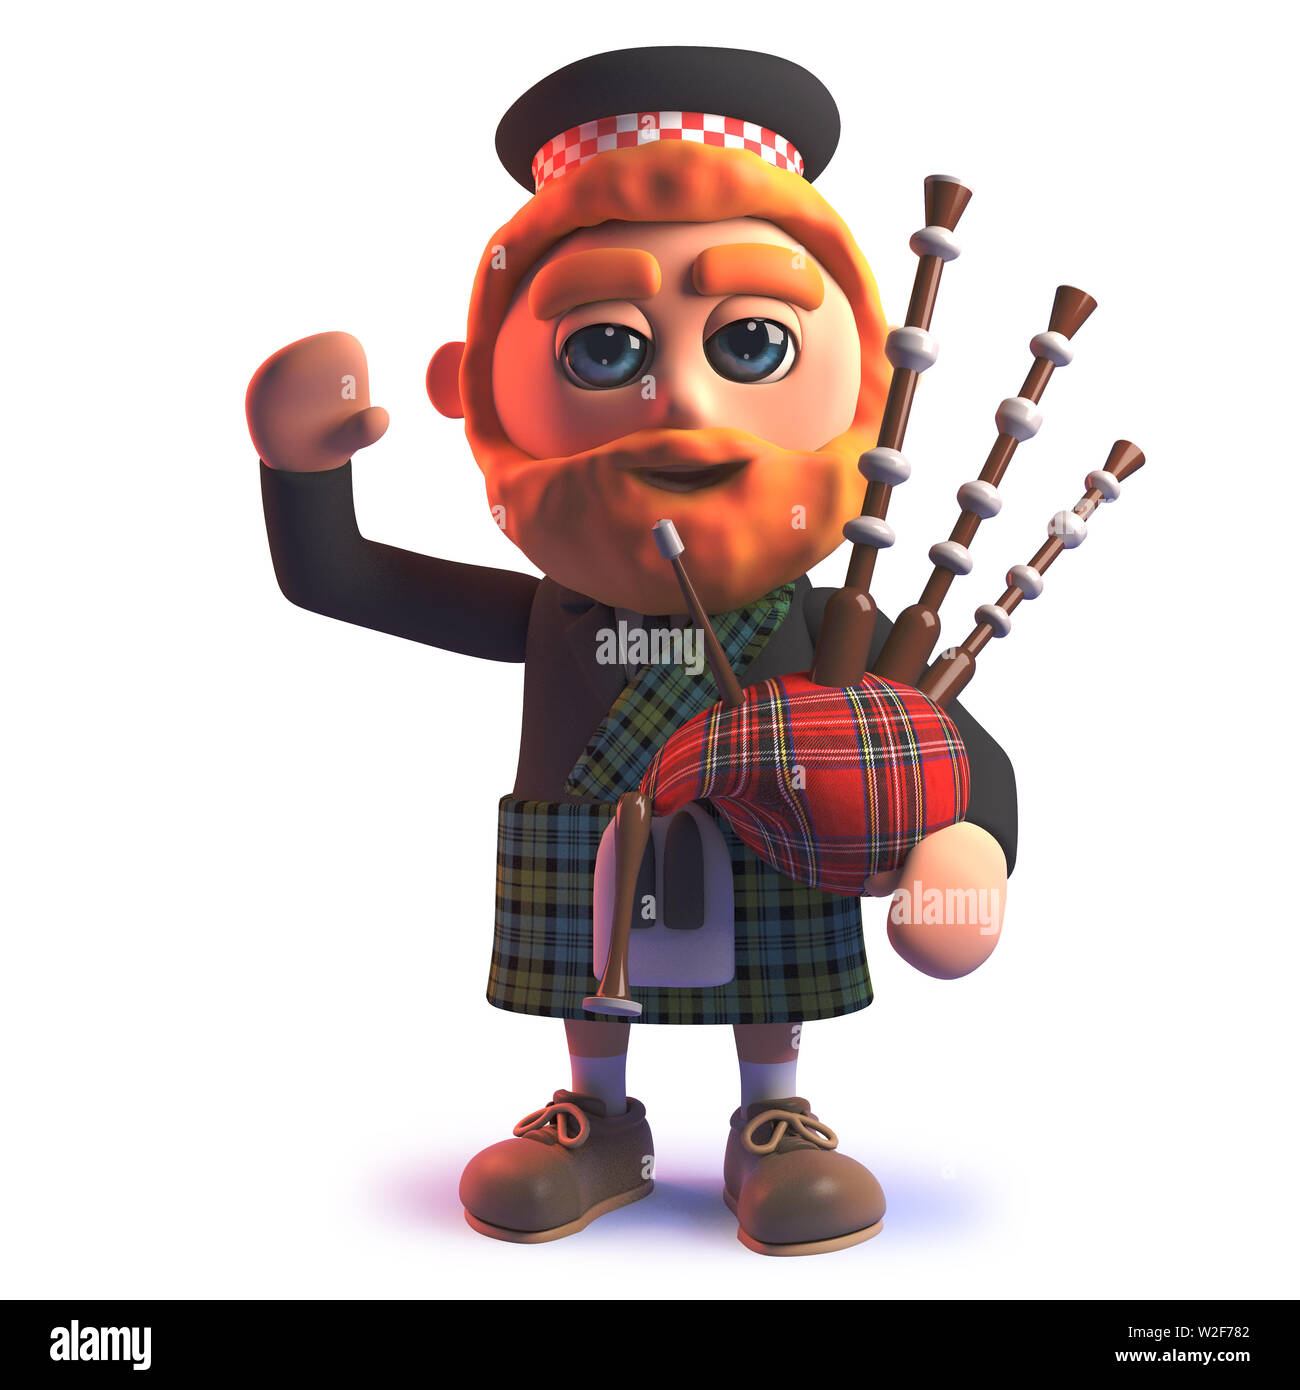 3d rendered image of a 3d cartoon Scots wearing a kilt and playing the bagpipes while waving Stock Photo